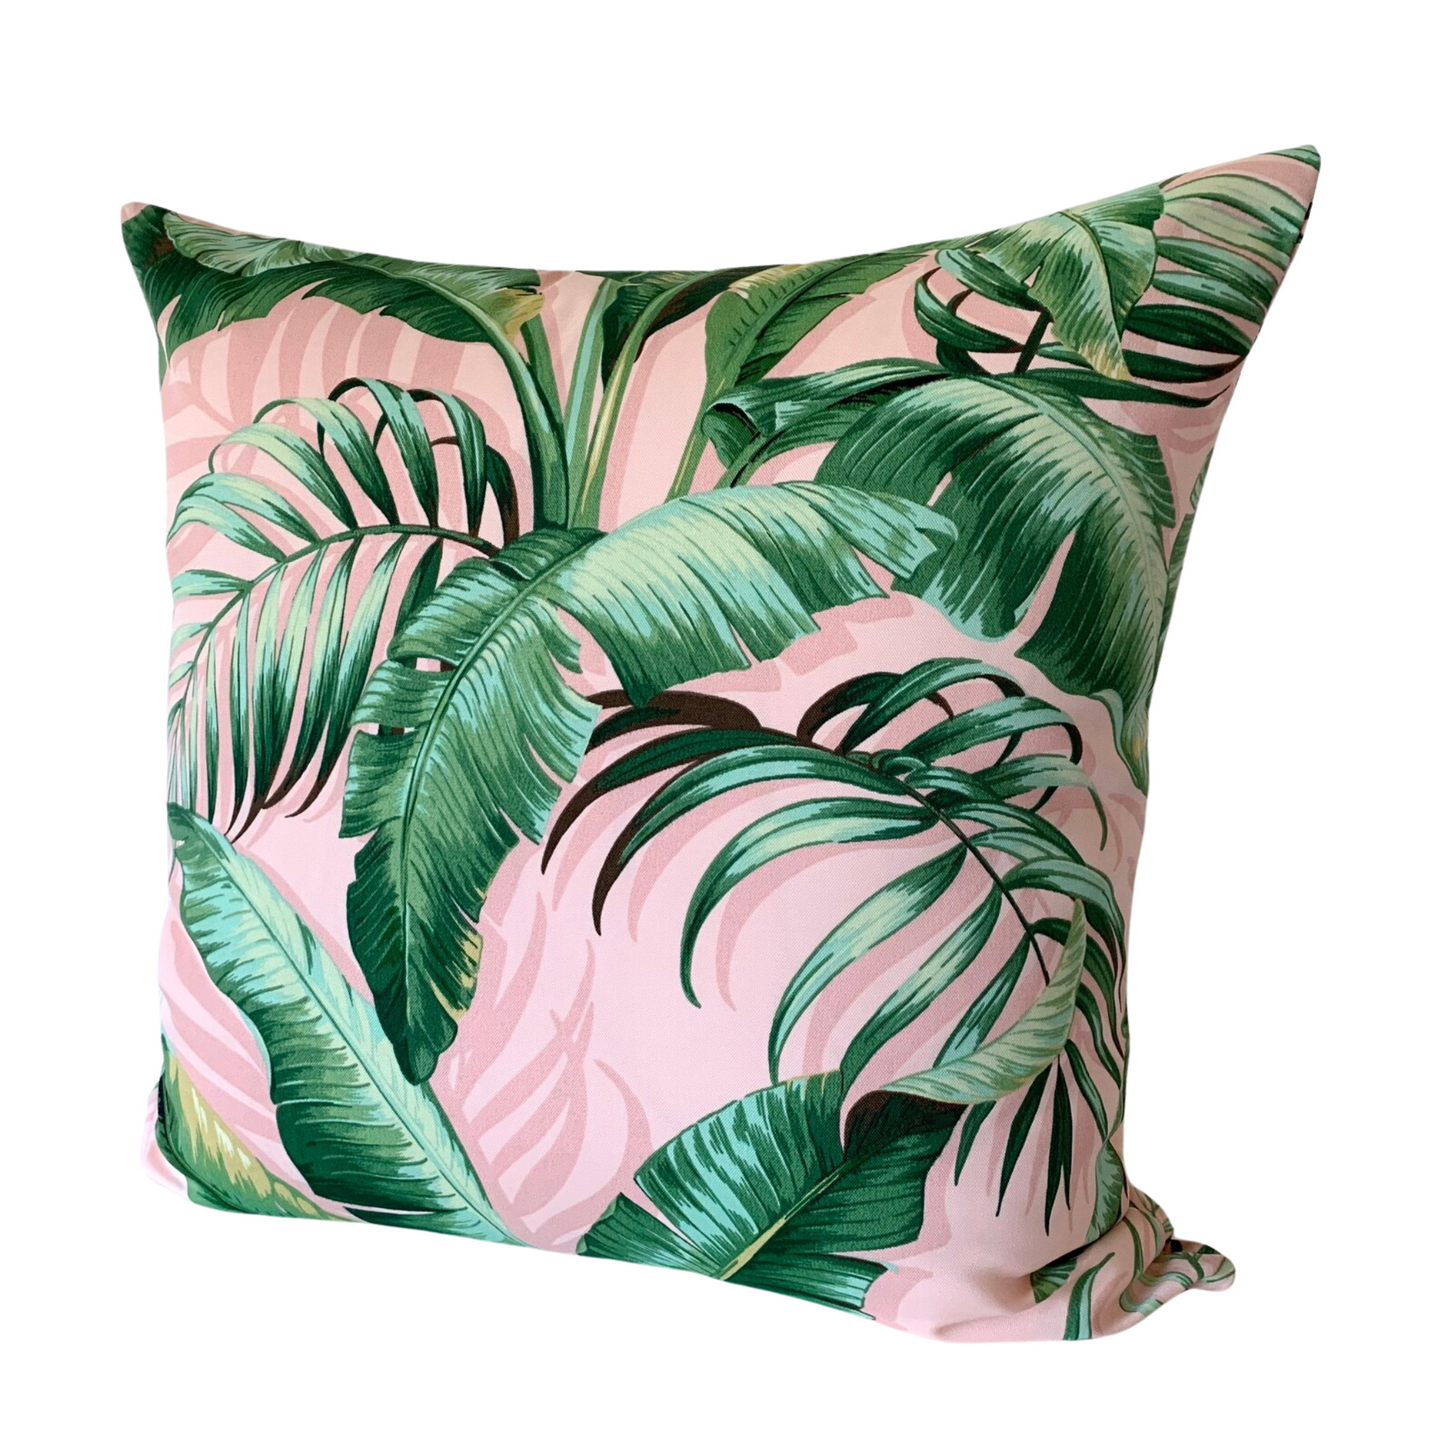 Tommy Bahama Palmiers Outdoor Throw Pillow Cover in Blush Pink - Tropical Palm Leaf  / Available in Throw, Lumbar, Bolster Pillow Covers